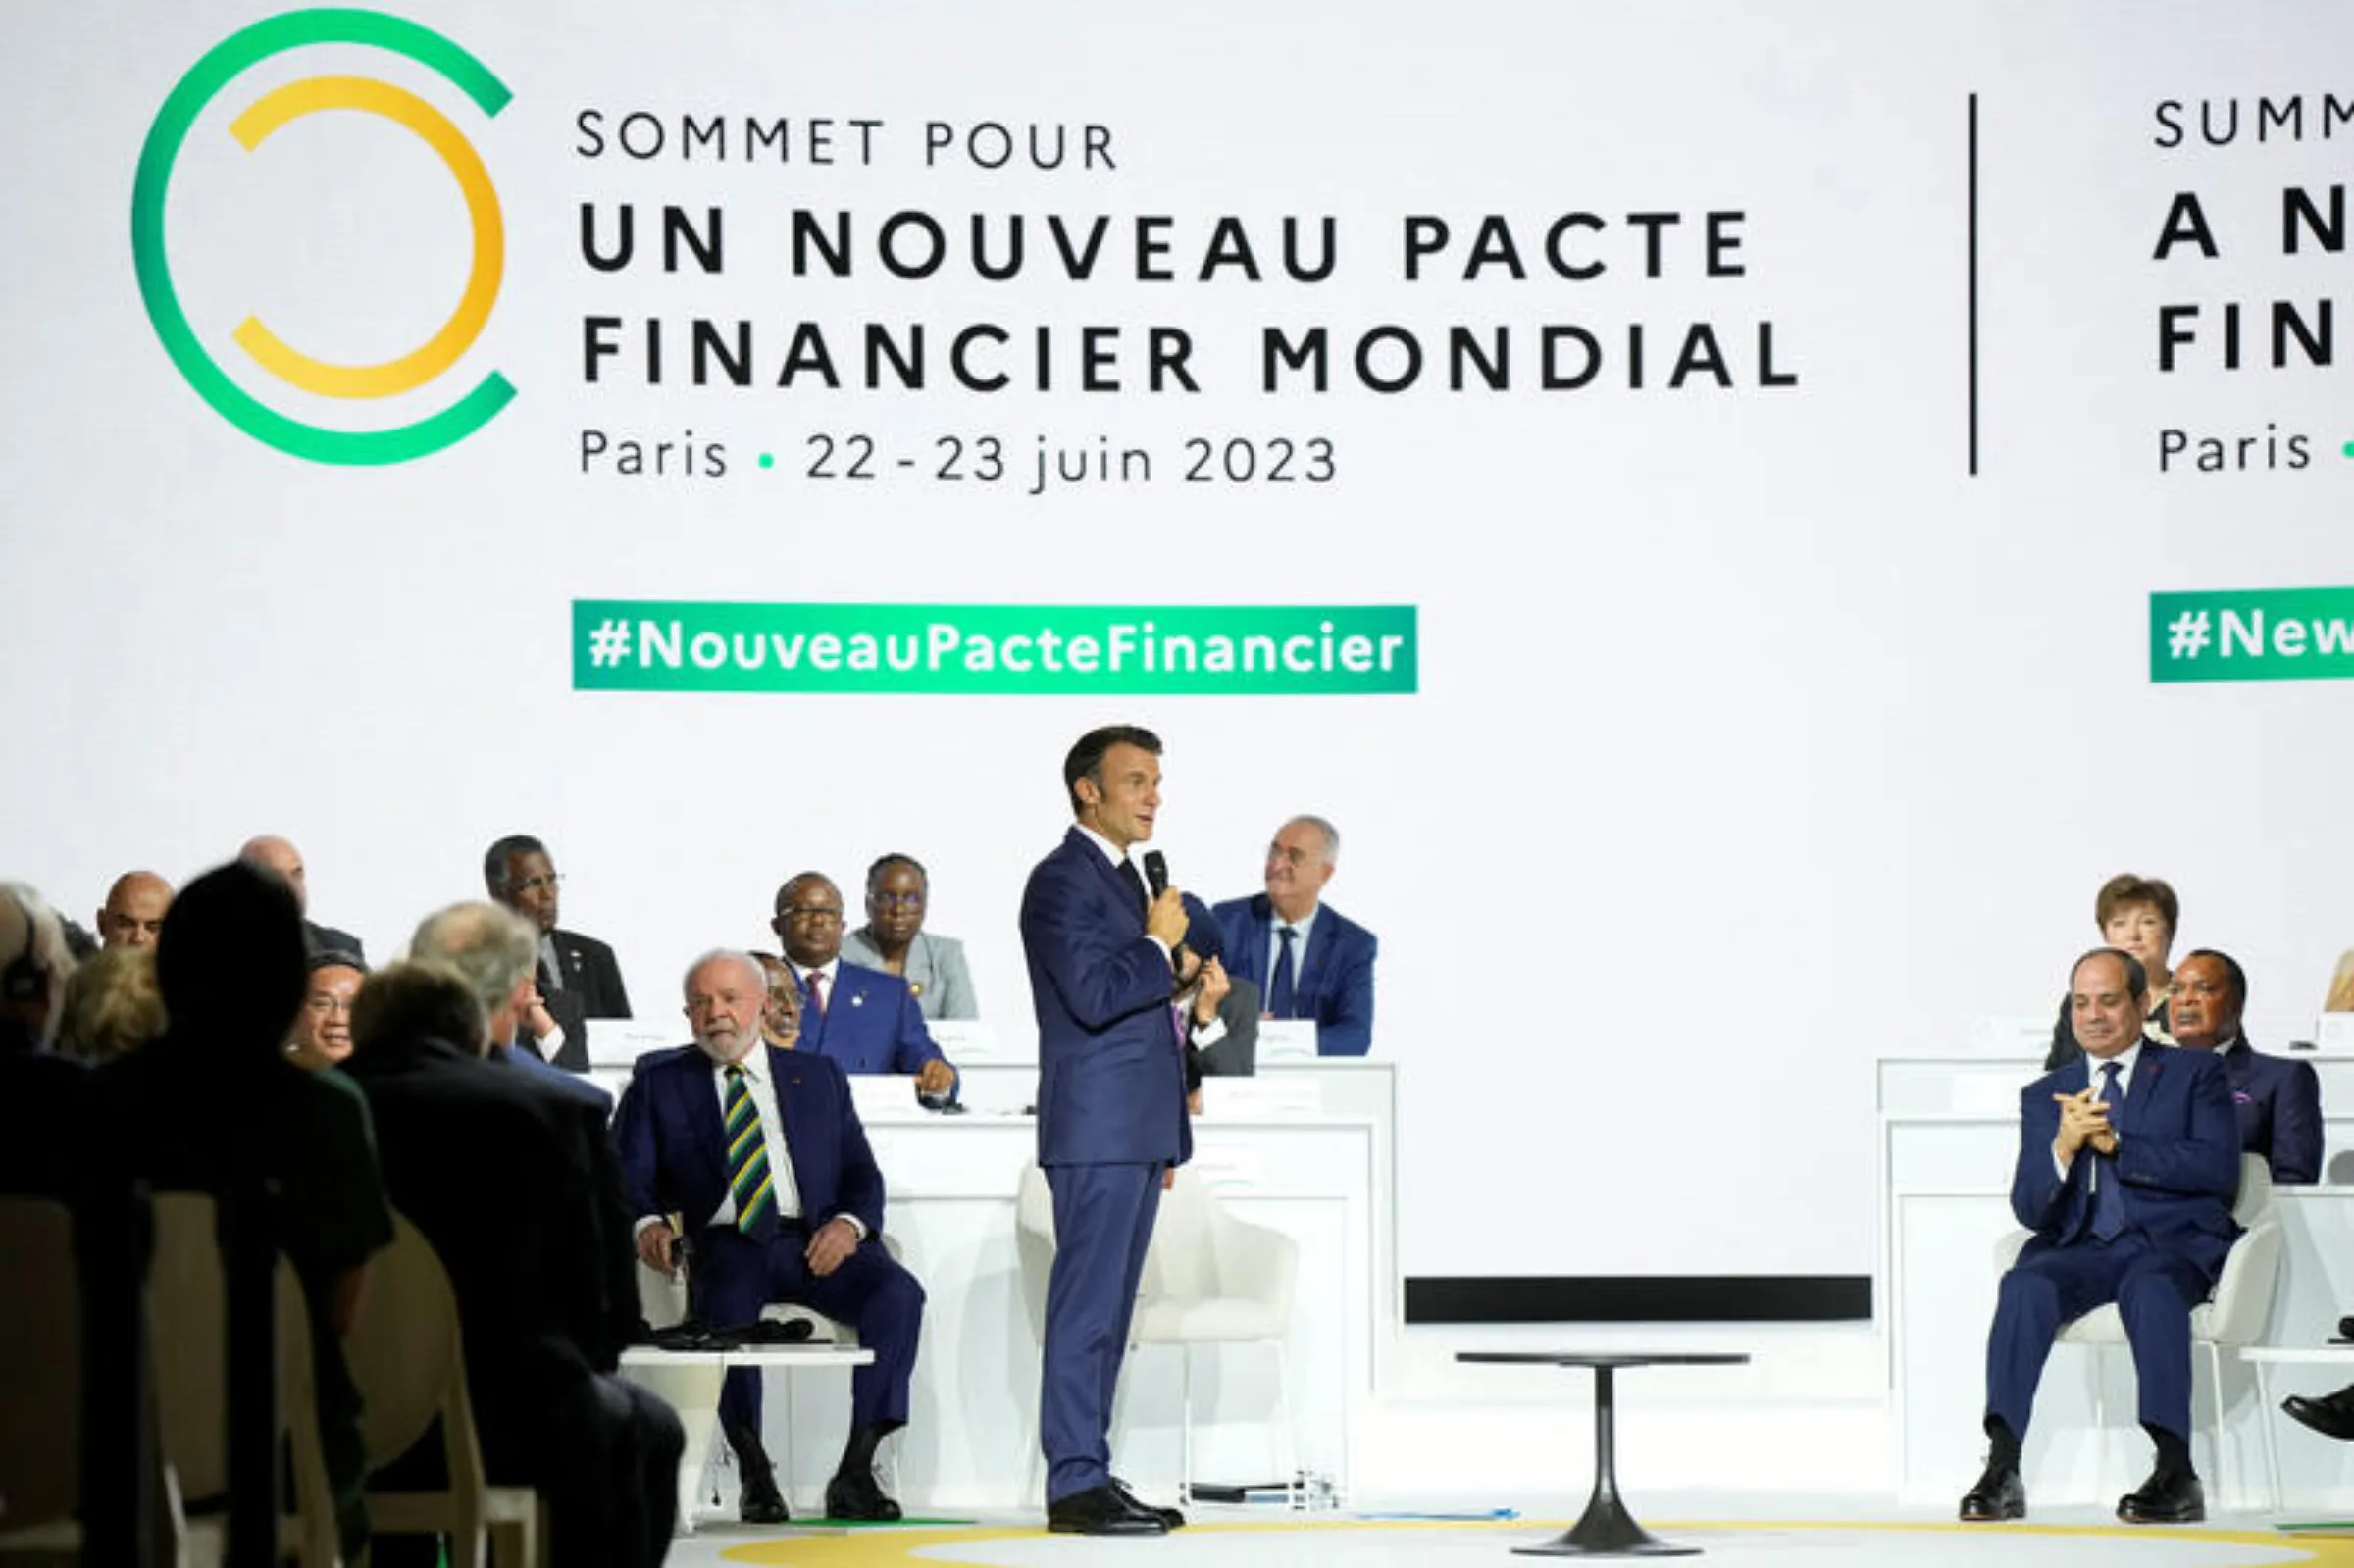 French President Emmanuel Macron, center, speaks while Brazilian President Luiz Inacio Lula Da Silva, left, and Egyptian President Abdel Fattah el-Sisi, right, listen during the closing session of the New Global Financial Pact Summit, Friday, June 23, 2023 in Paris, France. Lewis Joly/Pool via REUTERS